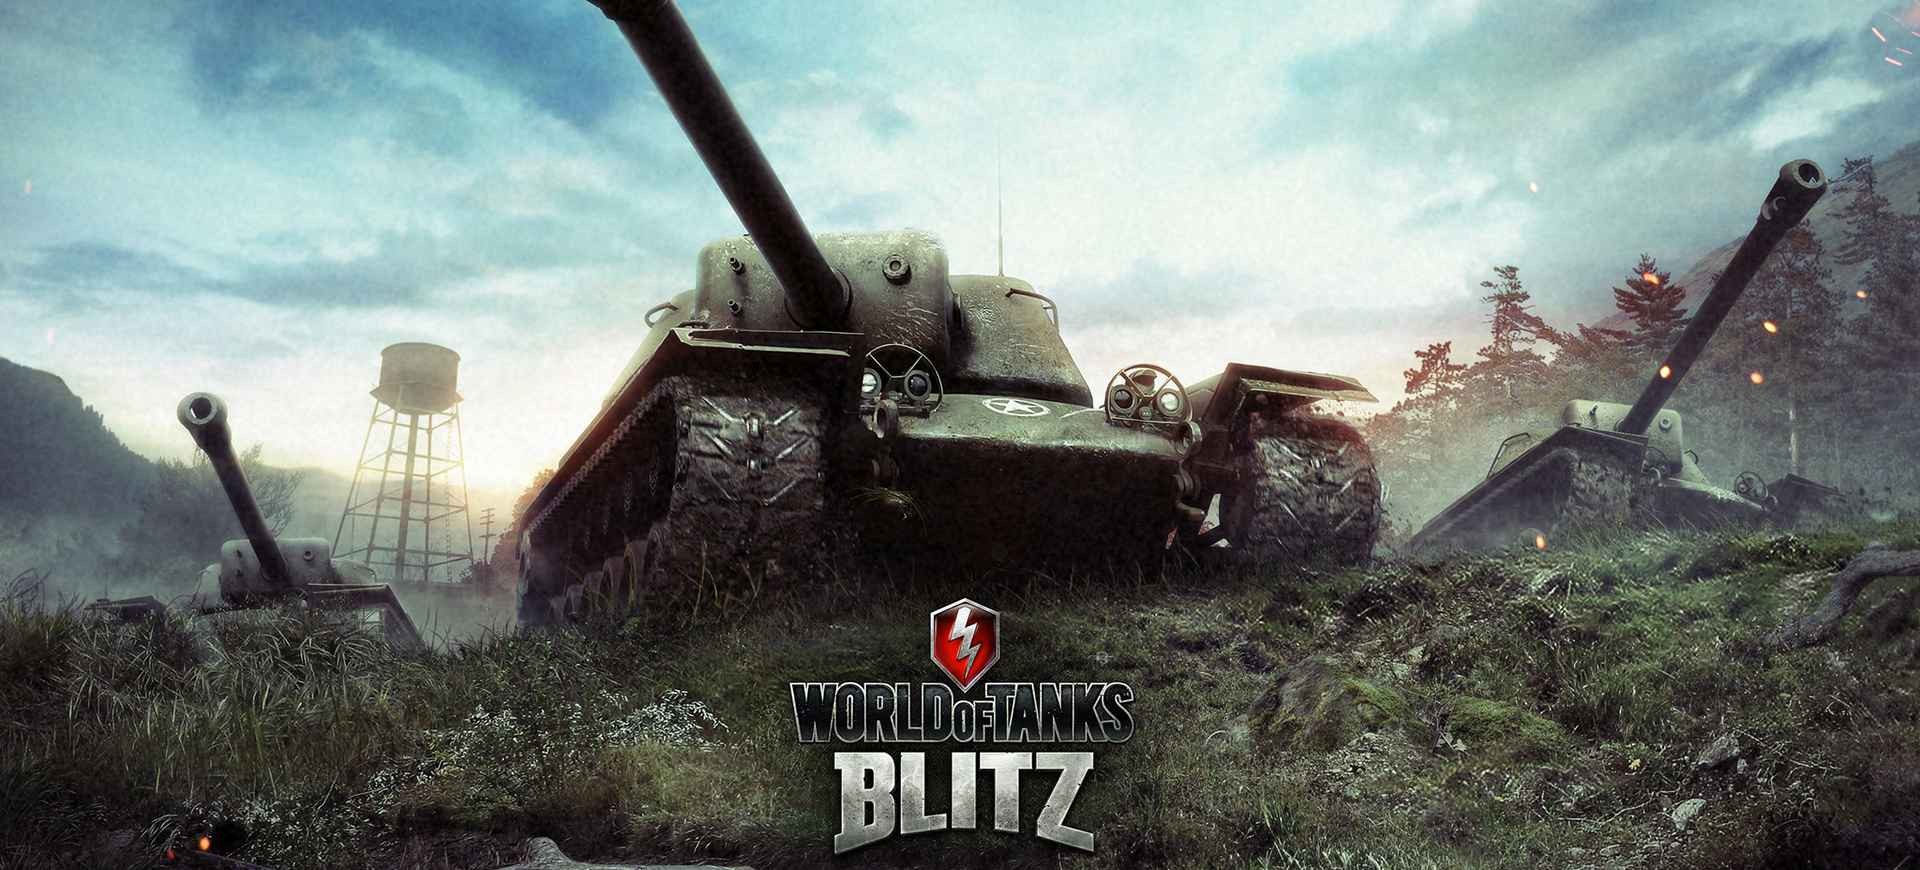 game-infographic-chien-truong-di-dong-nay-lua-cua-world-of-tanks-blitz